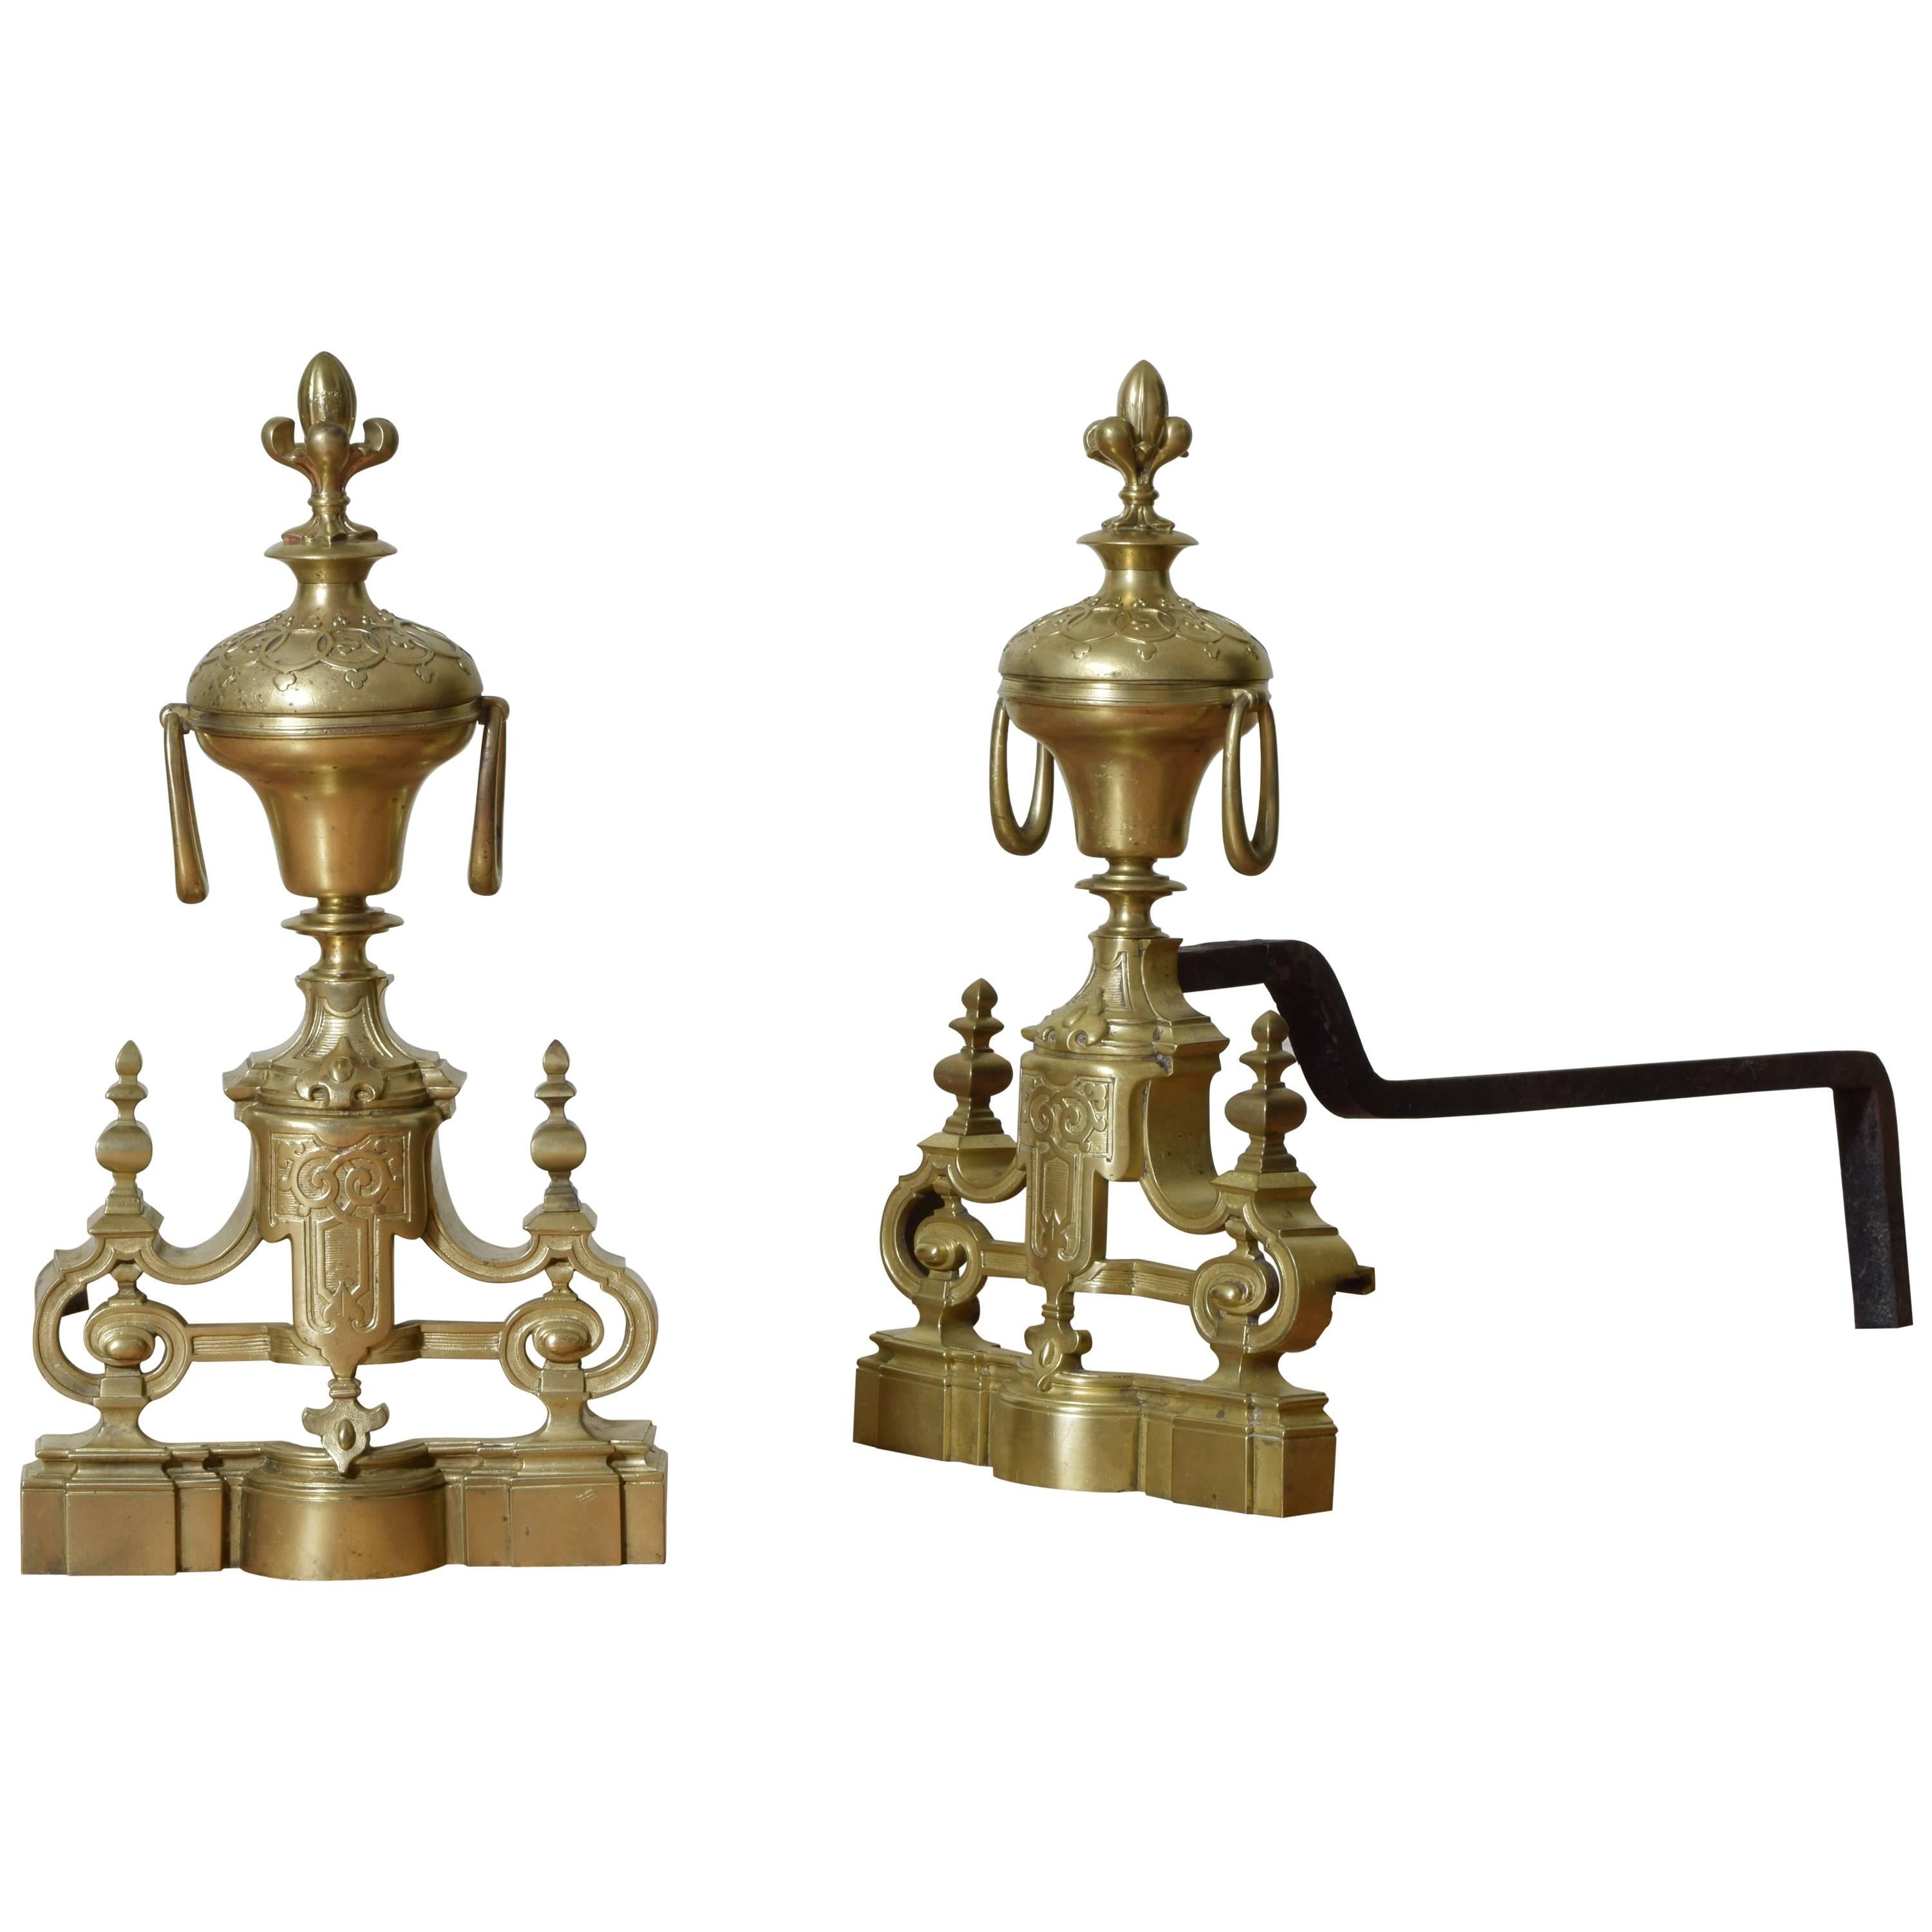 Pair of Louis Philippe Period Cast Brass Andirons Second Quarter of 19th Century